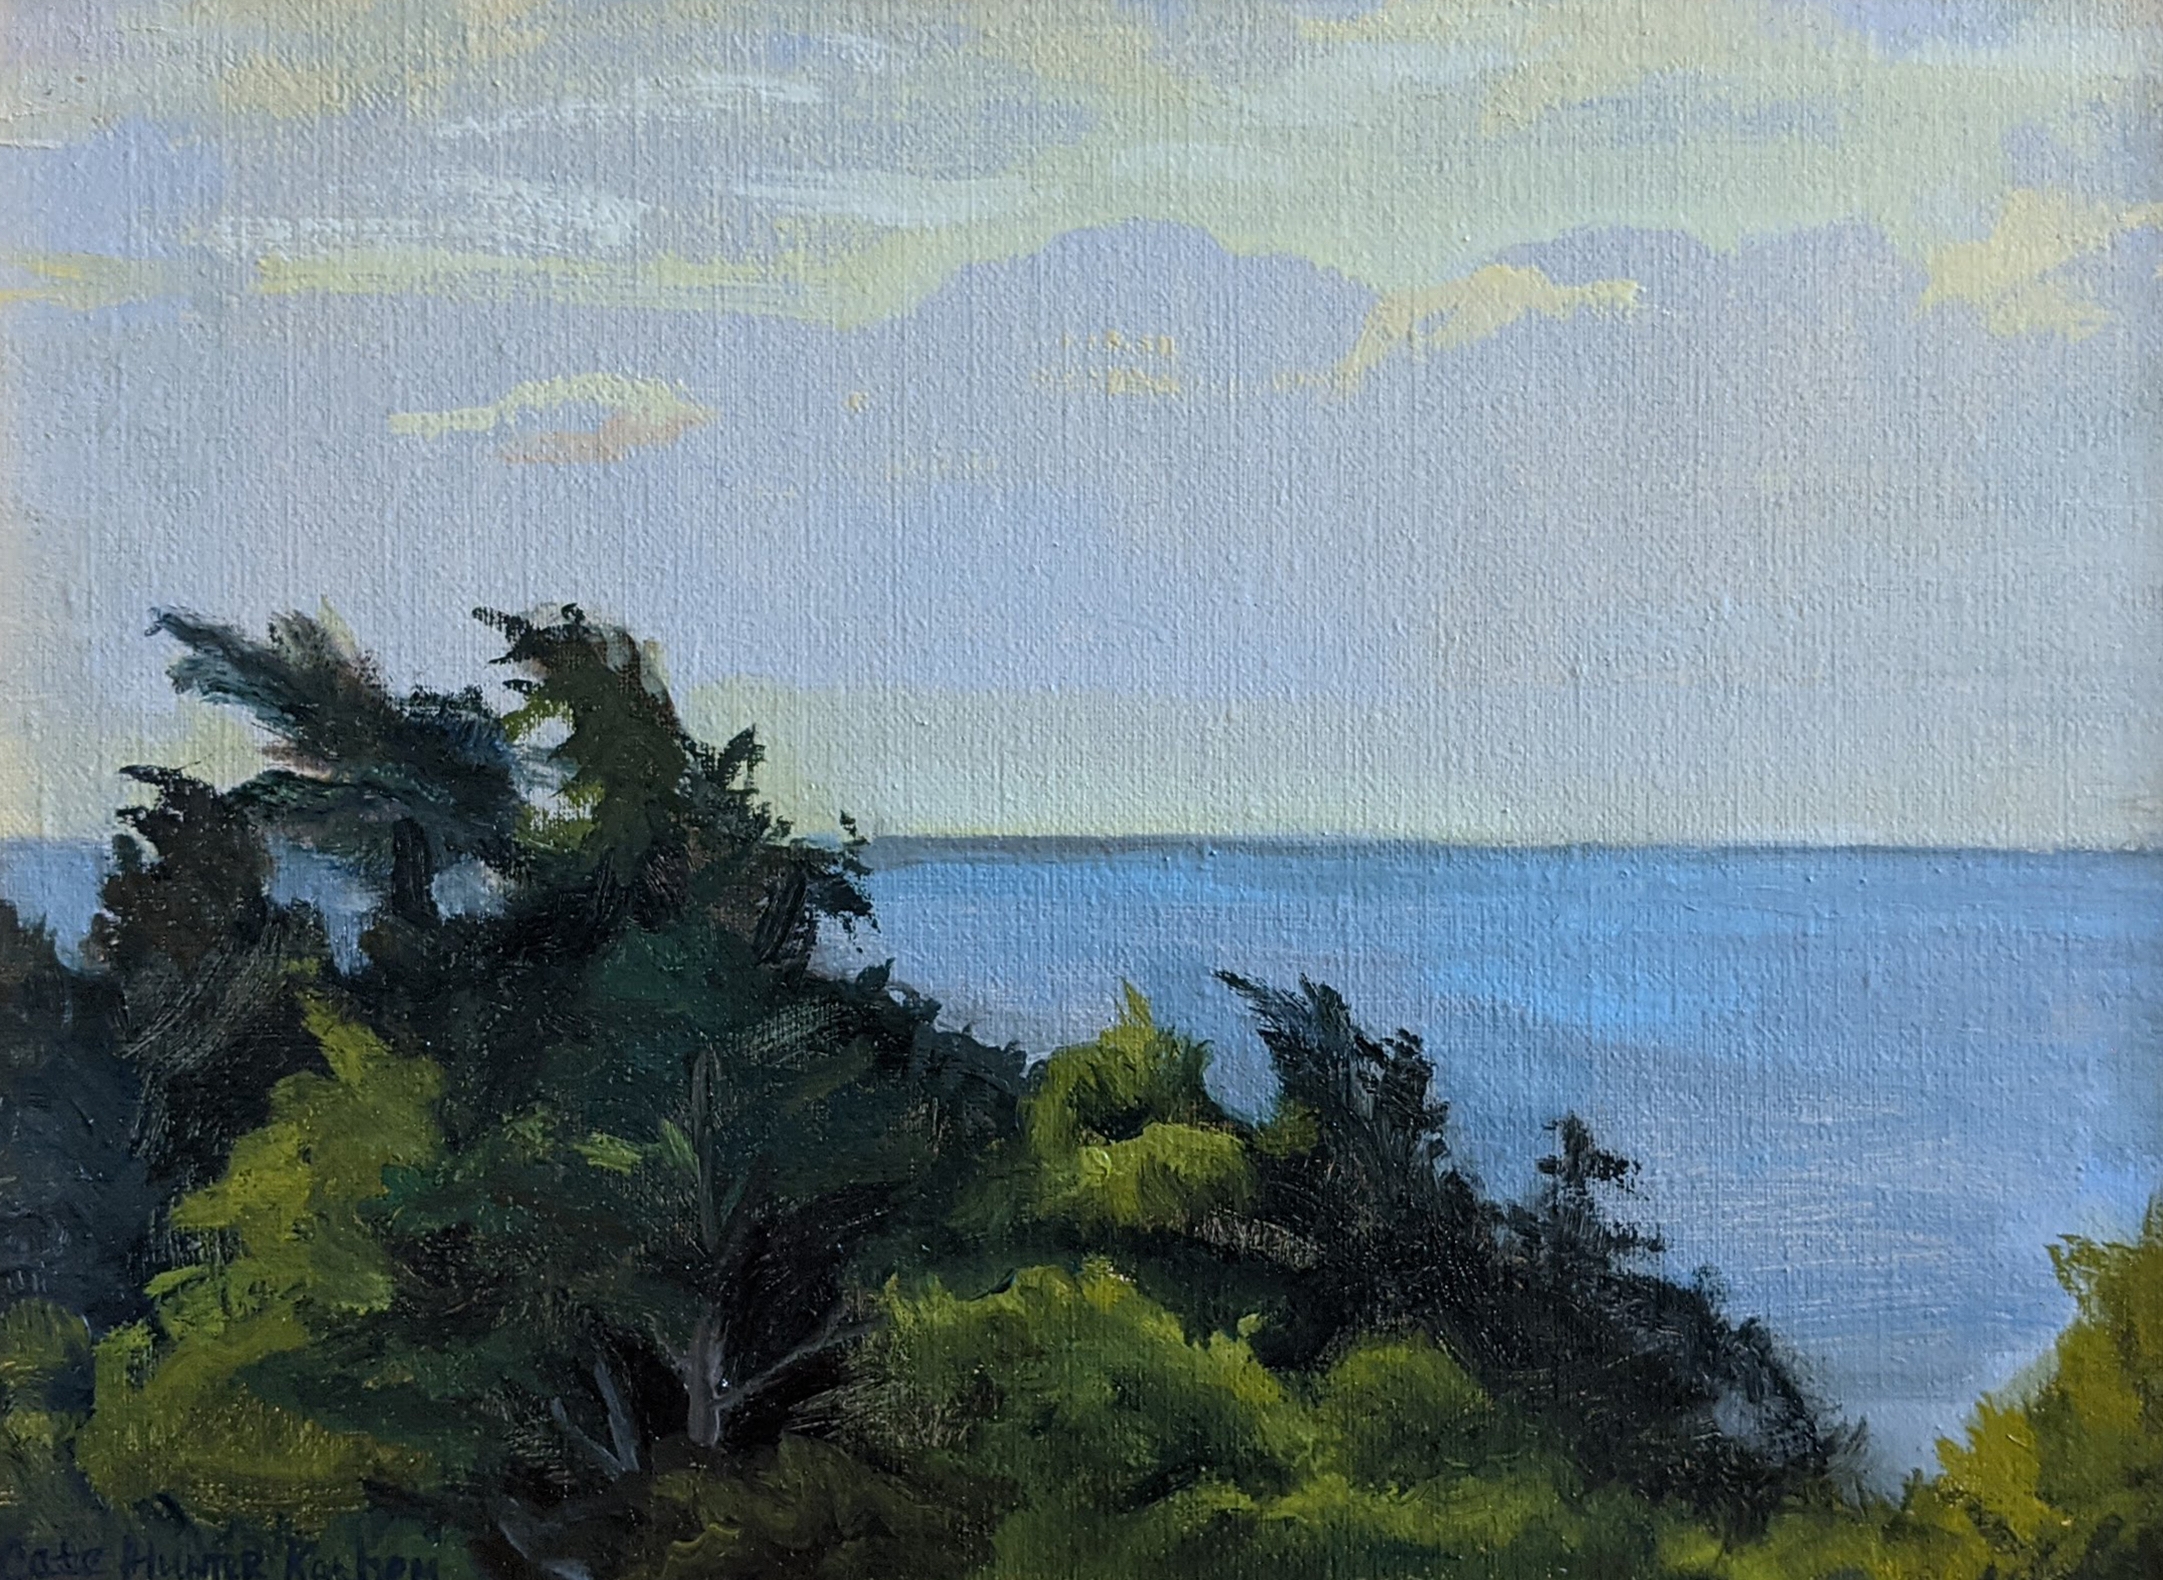 Painting of a tree with the ocean in the distance